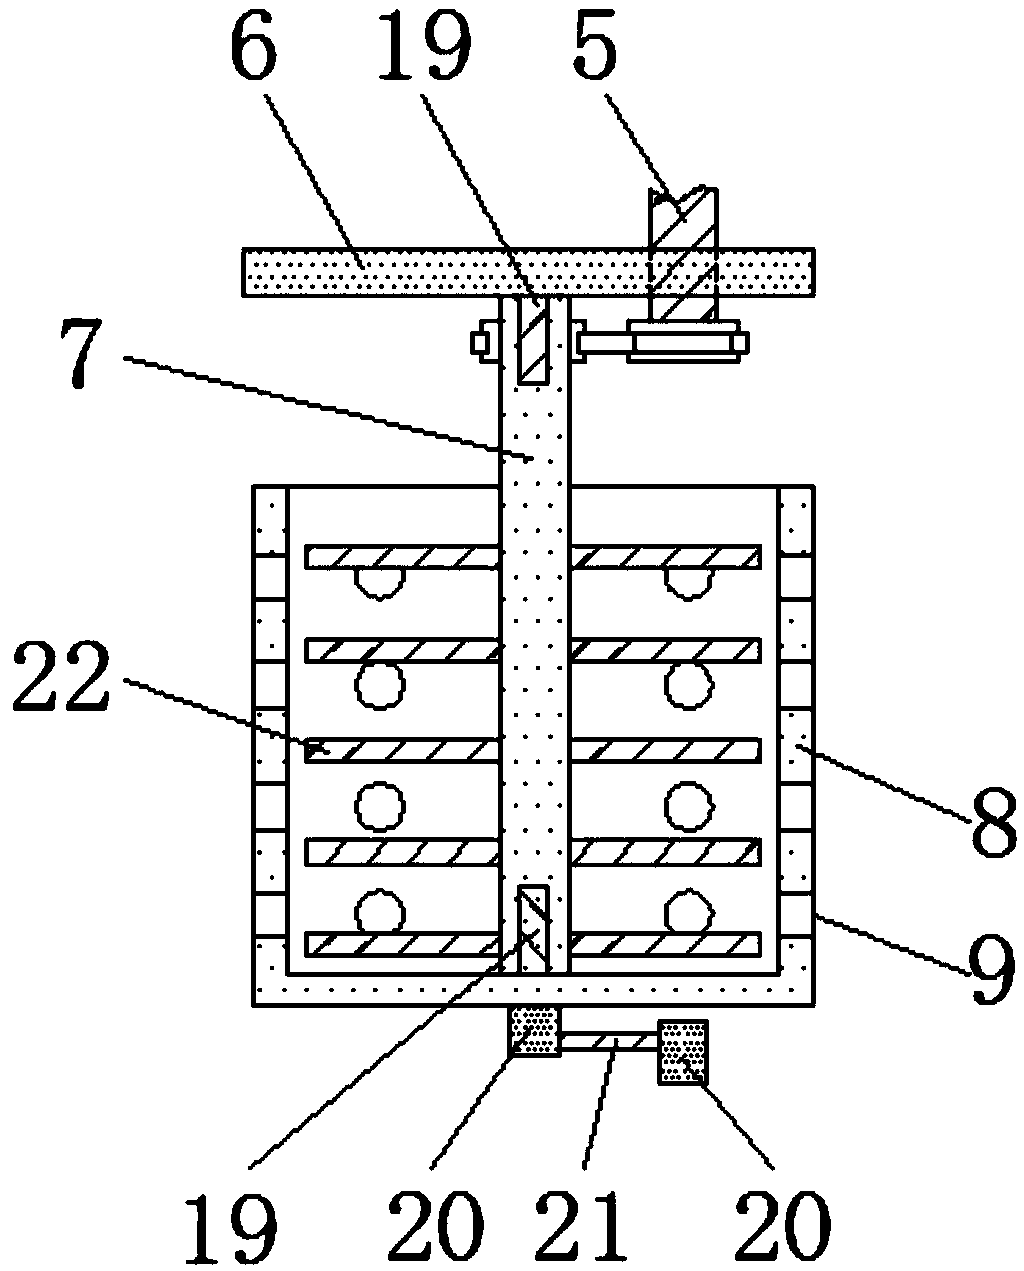 Multistage screening device for particulate matters